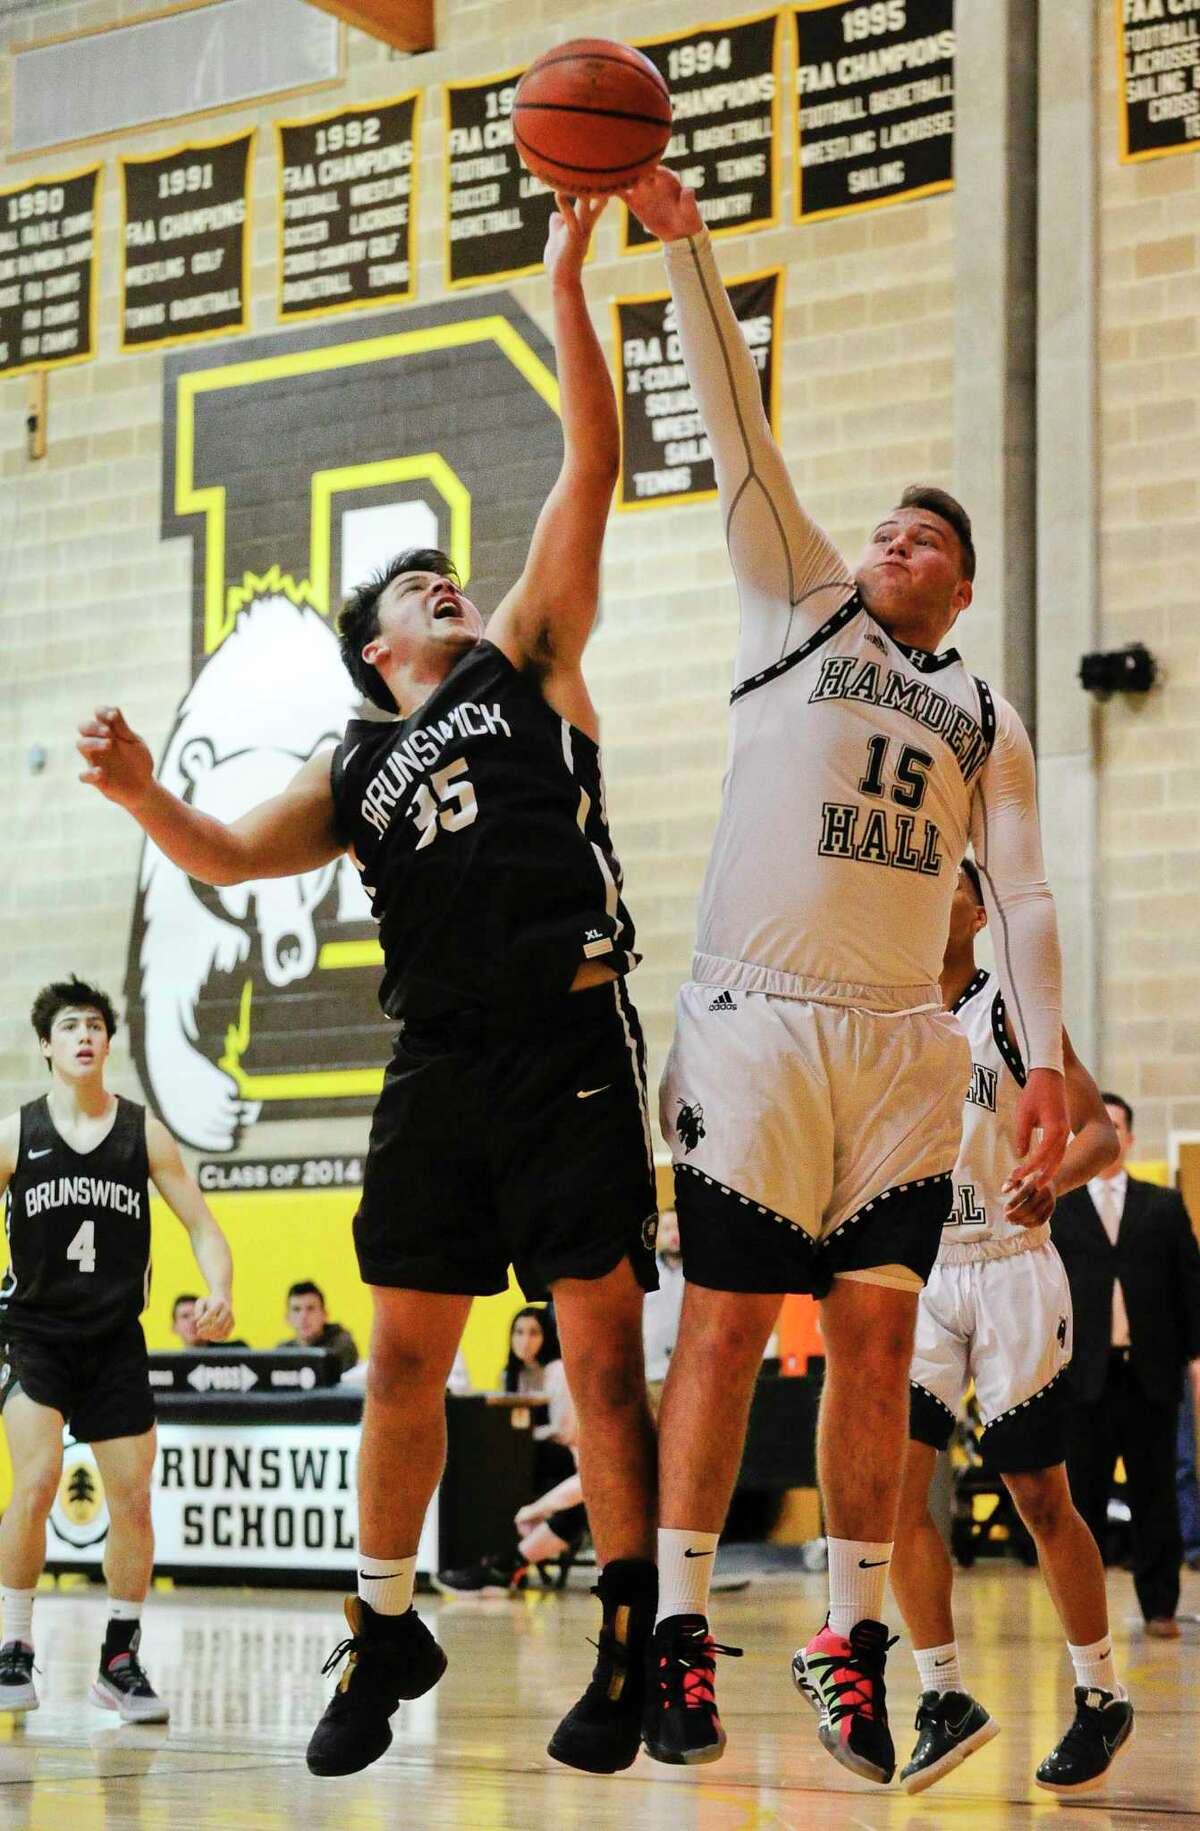 Brunswick's Henry Caponiti (35) and Hamden Hall's Owen MacDonough (15) battle for a rebound in the first half of an FAA boys basketball game at Brunswick School on Feb. 14, 2020 in Greenwich Connecticut. Hamden Hall defeated Brunswick 59-58.